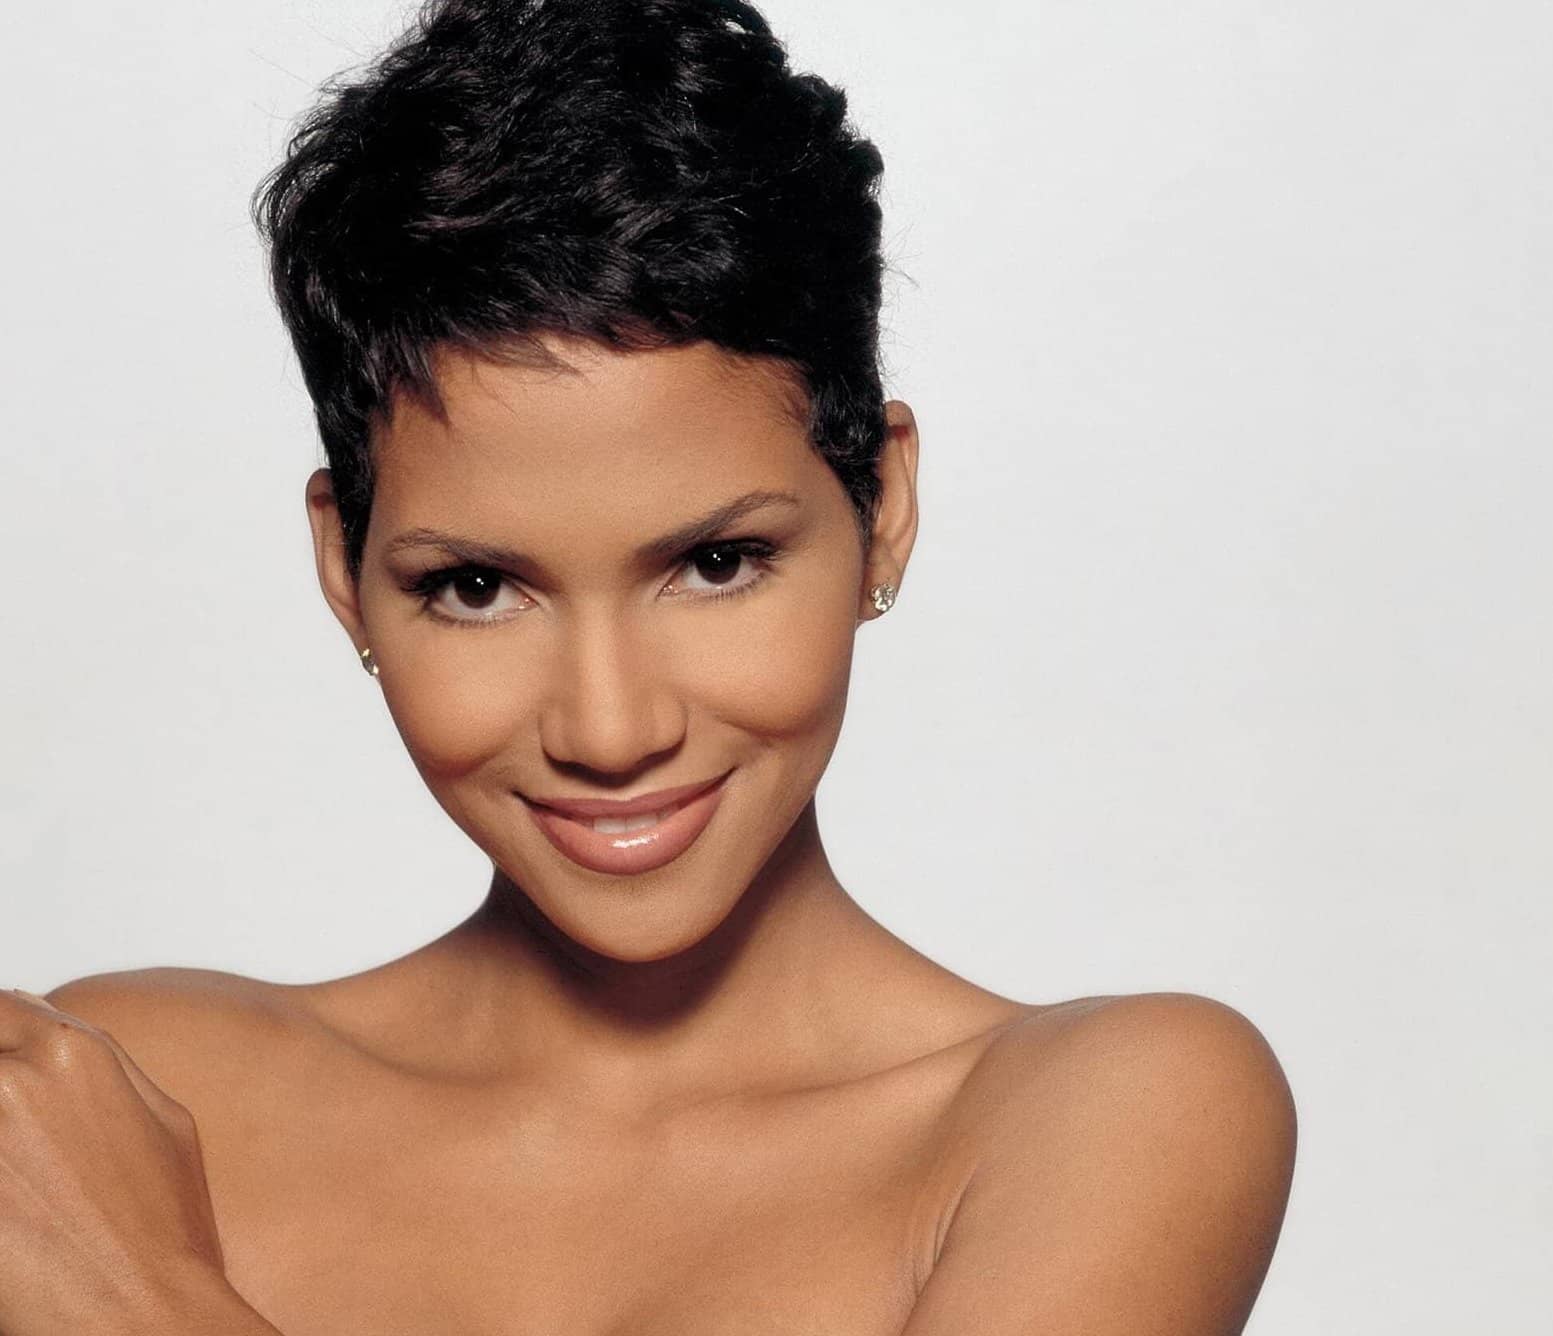 brenda kennelly recommends halle berry playboy pic